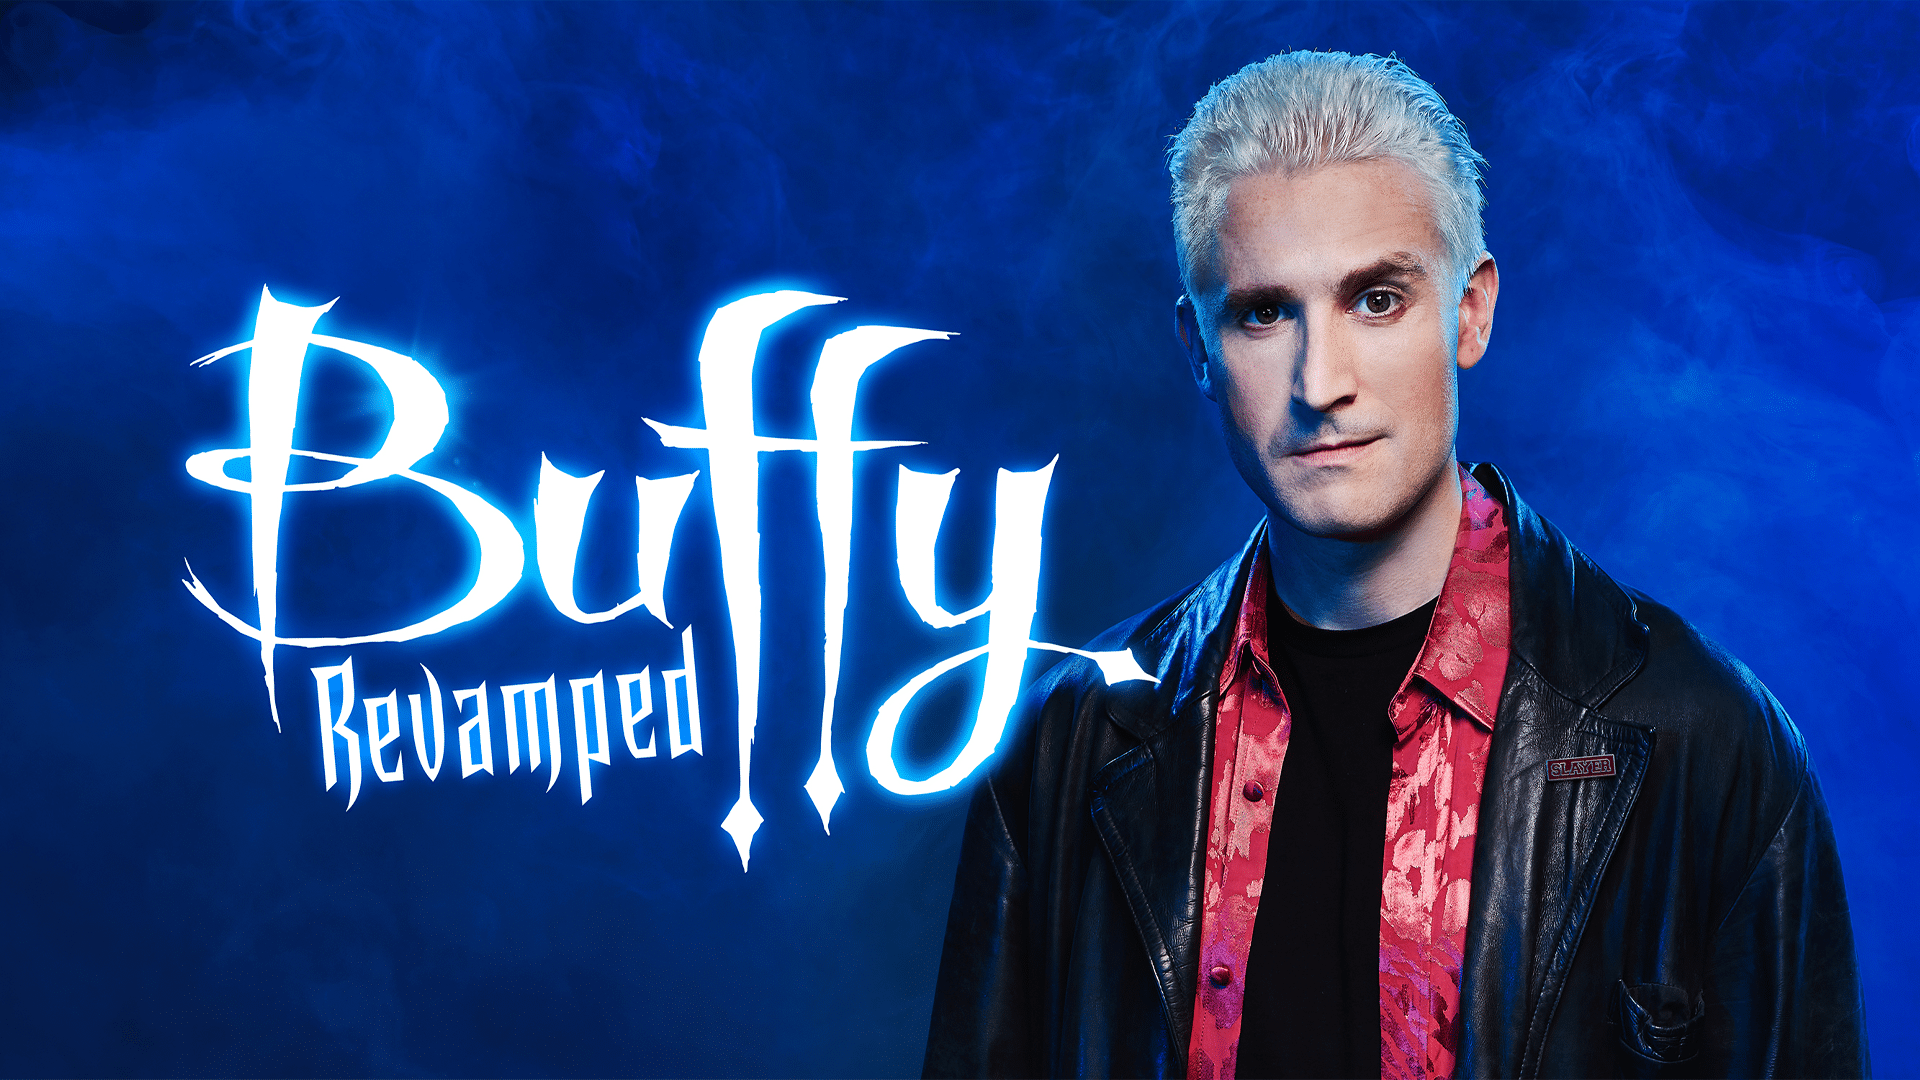 Buffy Revamped artwork - Brendan Murphy as Spike: a blonde-haired man wearing a red shirt underneath a black leather jacket stares ahead with a serious expression on his face. Text next to him reads: 'Buffy Revamped'. The background is smoky and blue.